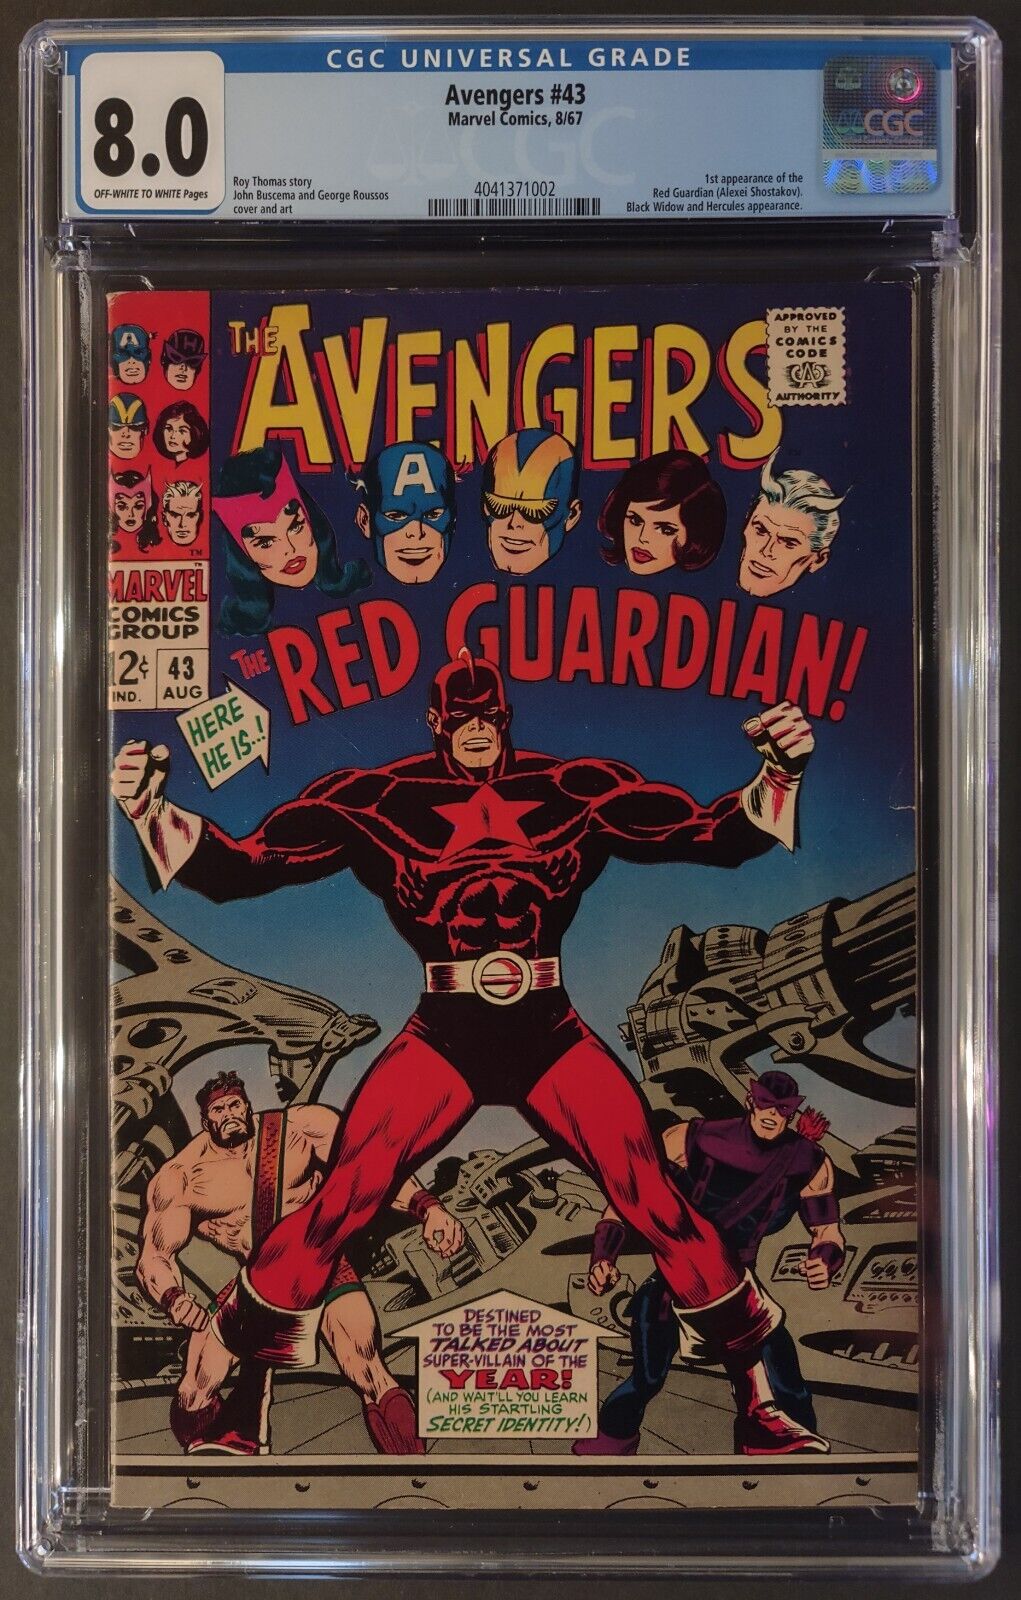 AVENGERS #43 CGC 8.0 OW-W PAGES - MARVEL COMICS AUGUST 1967 - FIRST RED GAURDIAN